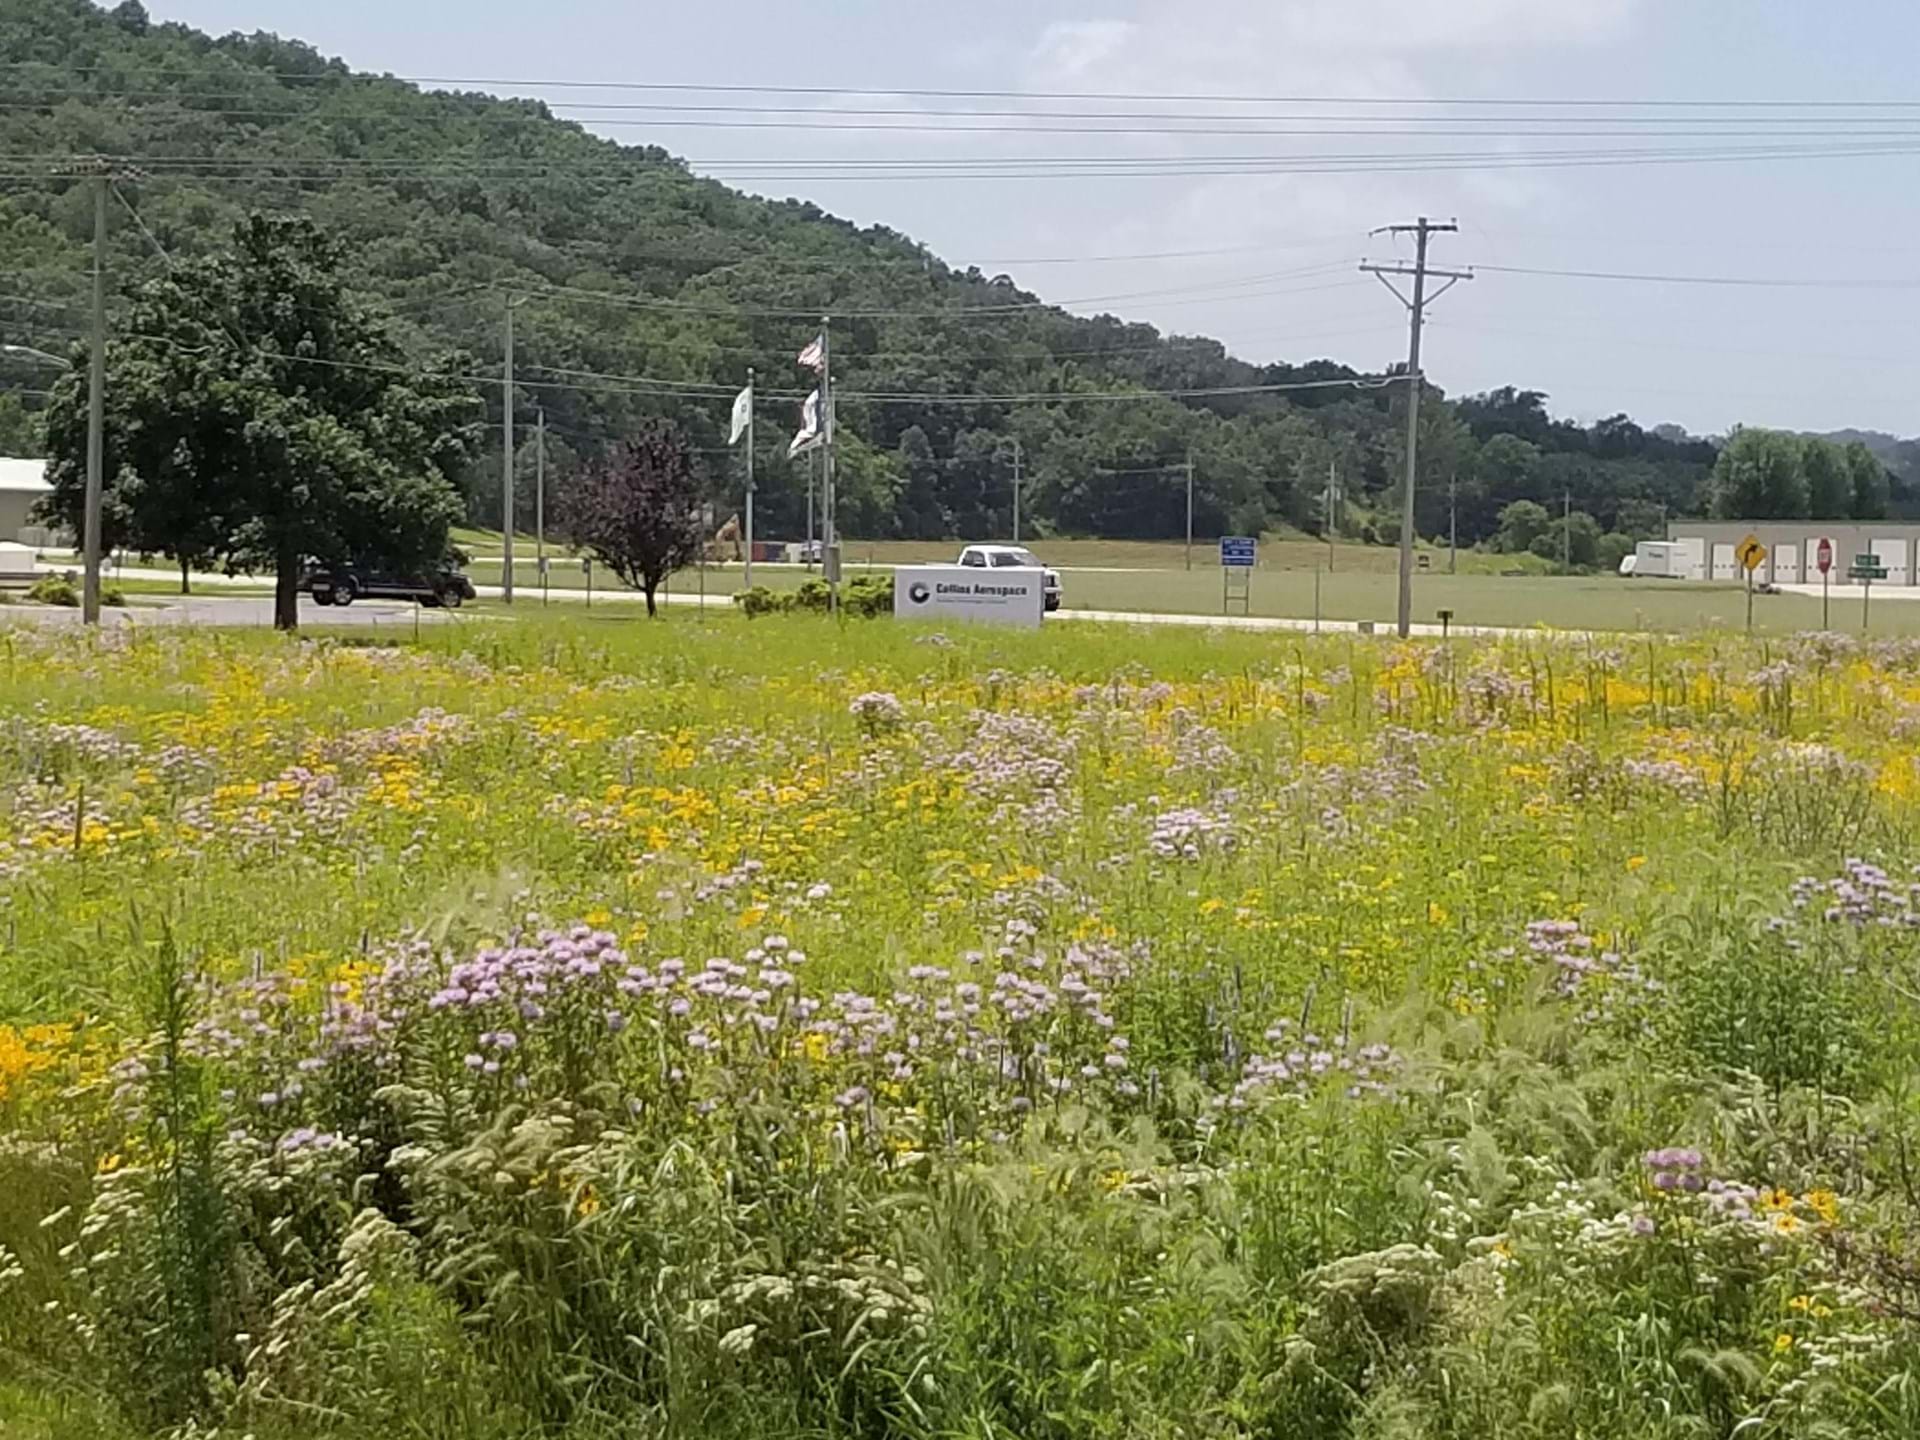 wildflowers and grasses at Freeport Park